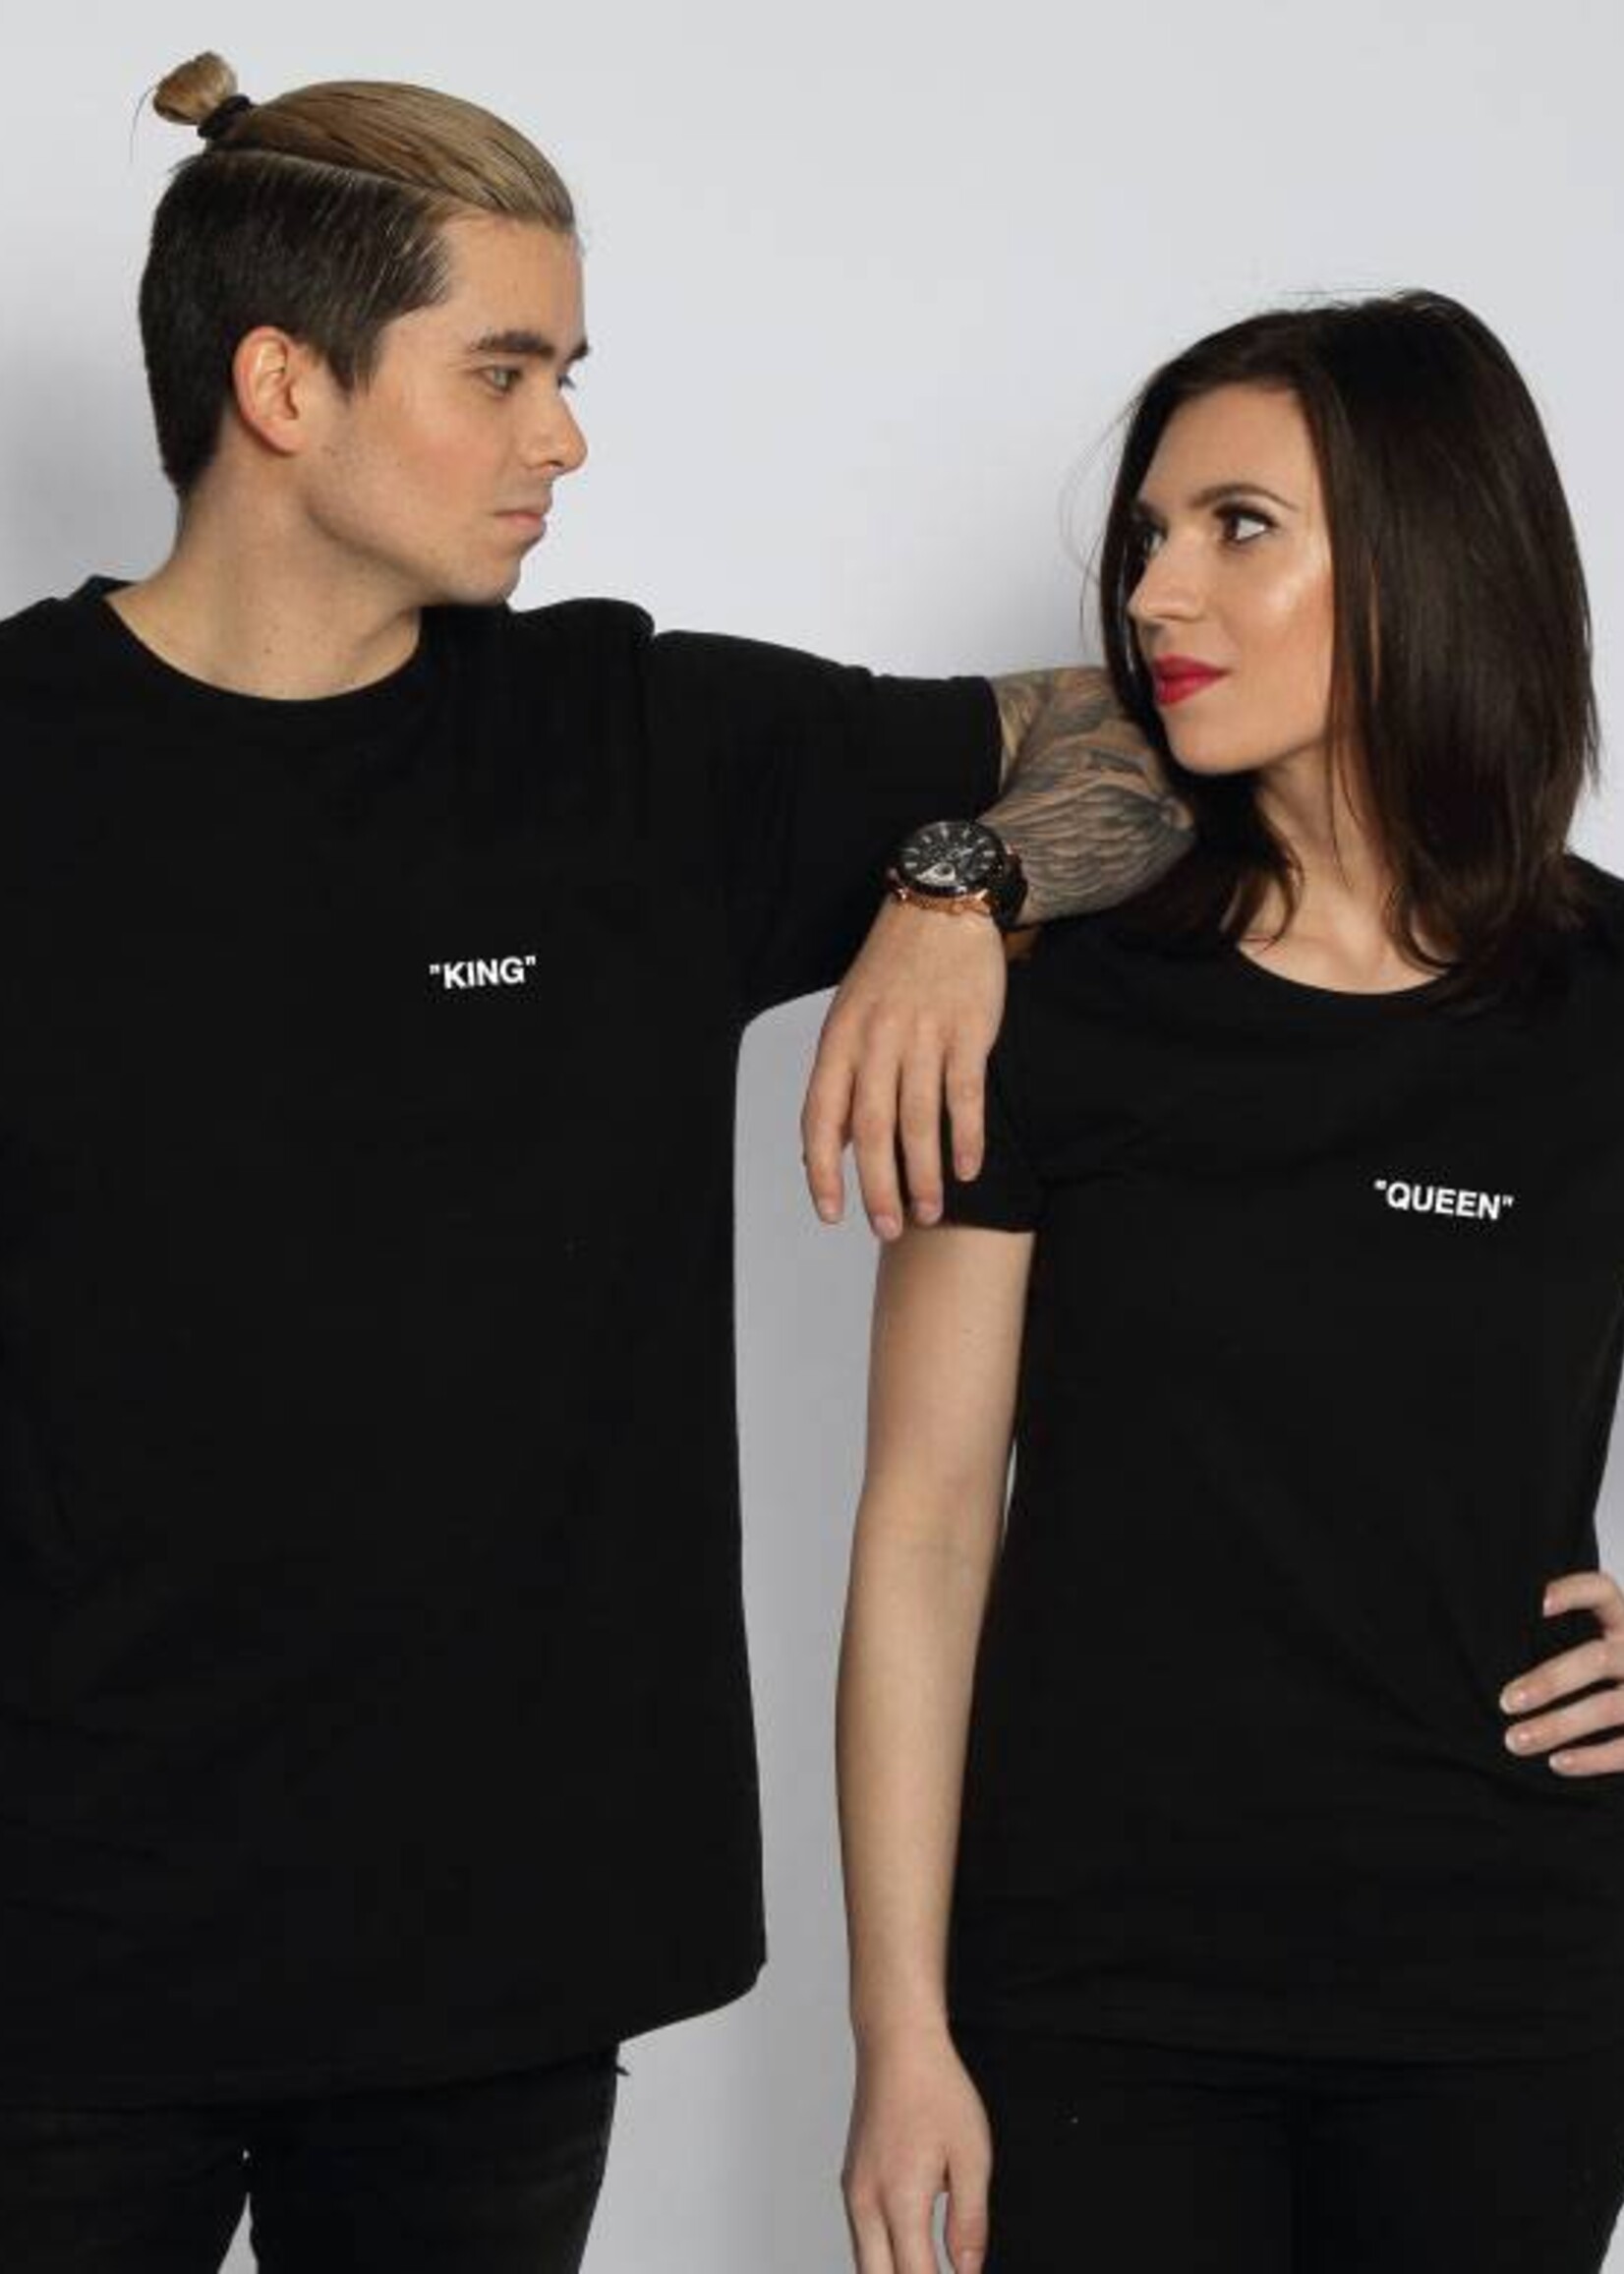 KING & QUEEN QUOTE COUPLE TEES